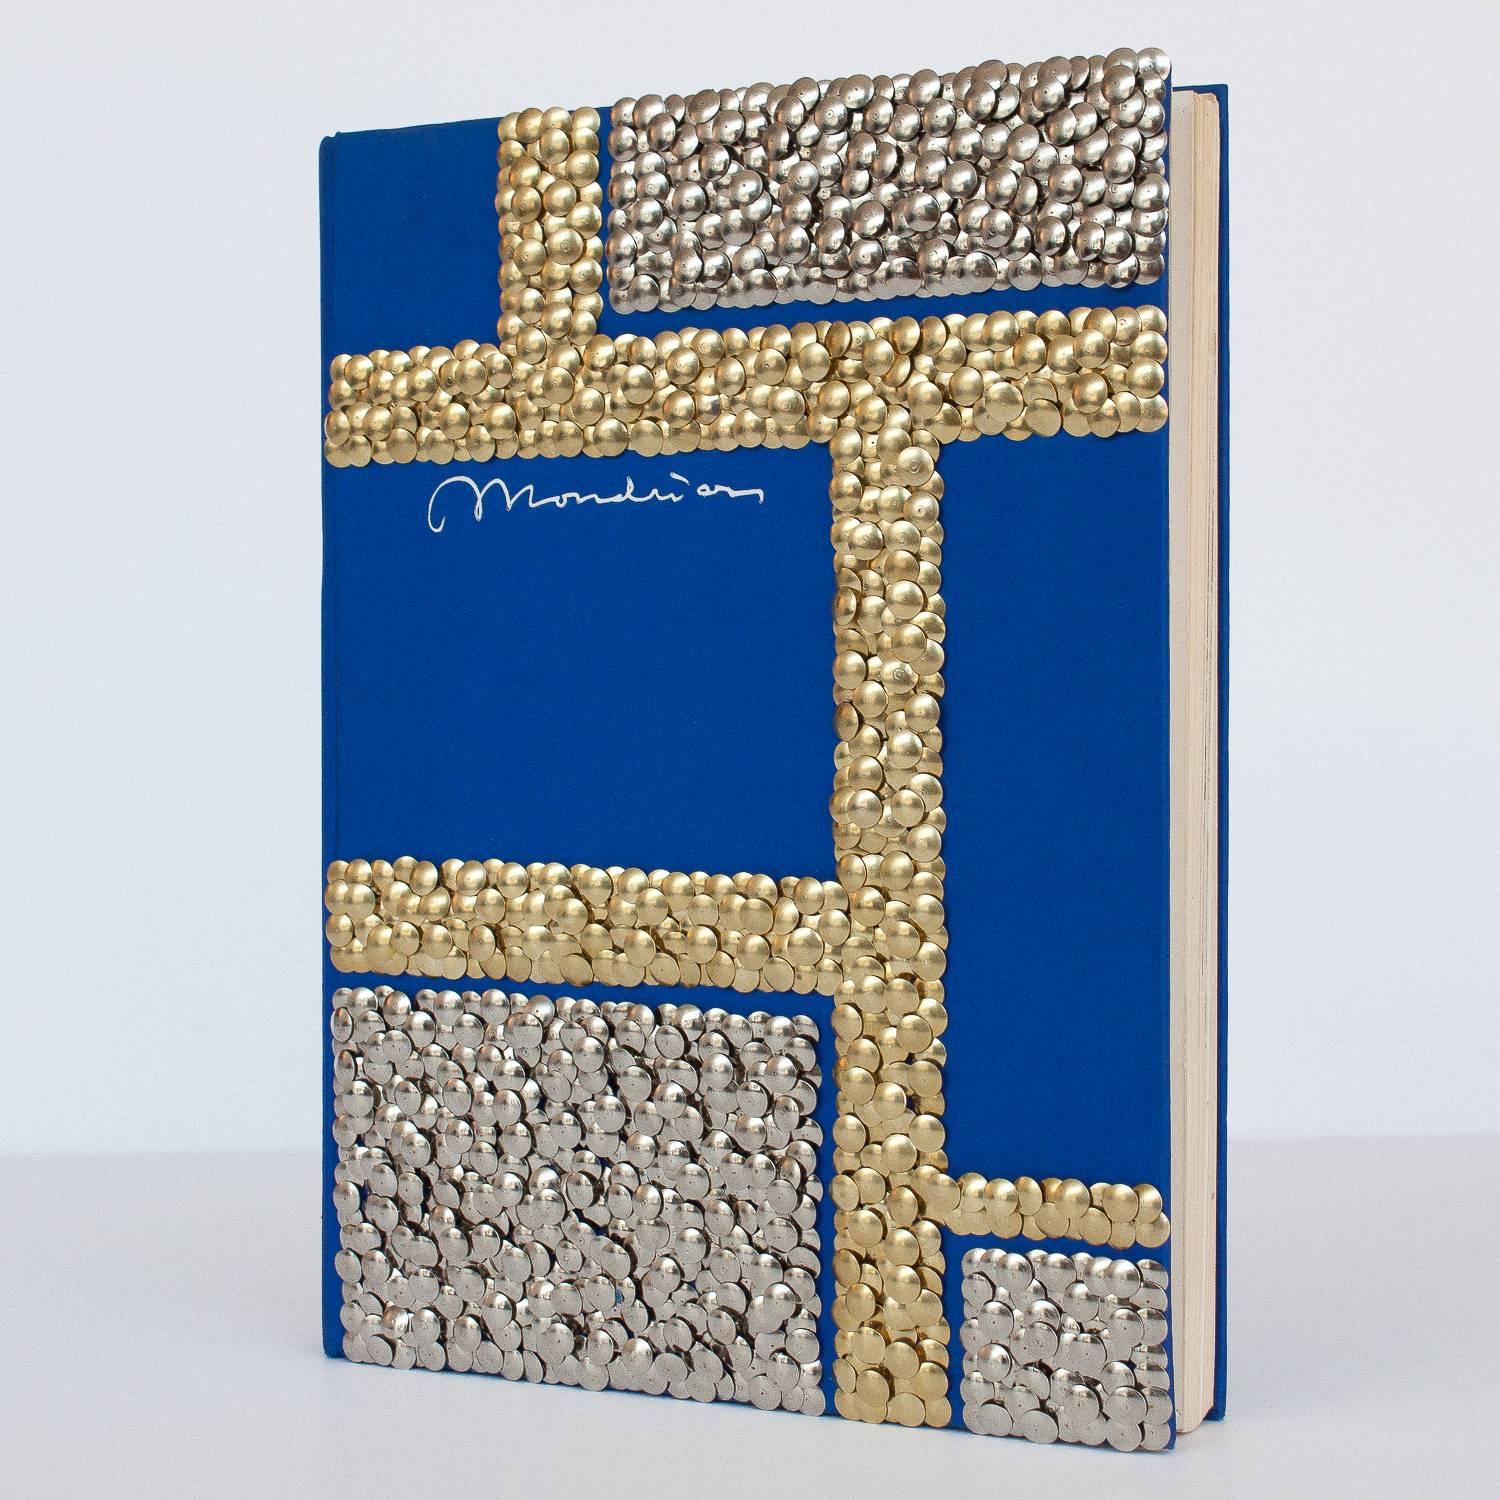 Hand gilded copy of a Mondrian art book with silver and brass thumbtacks forming a geometric grid pattern reminiscent of the iconic artwork by Piet Mondrian on the front cover by Chicago artist Brian Stanziale.

Sculptural and playful,